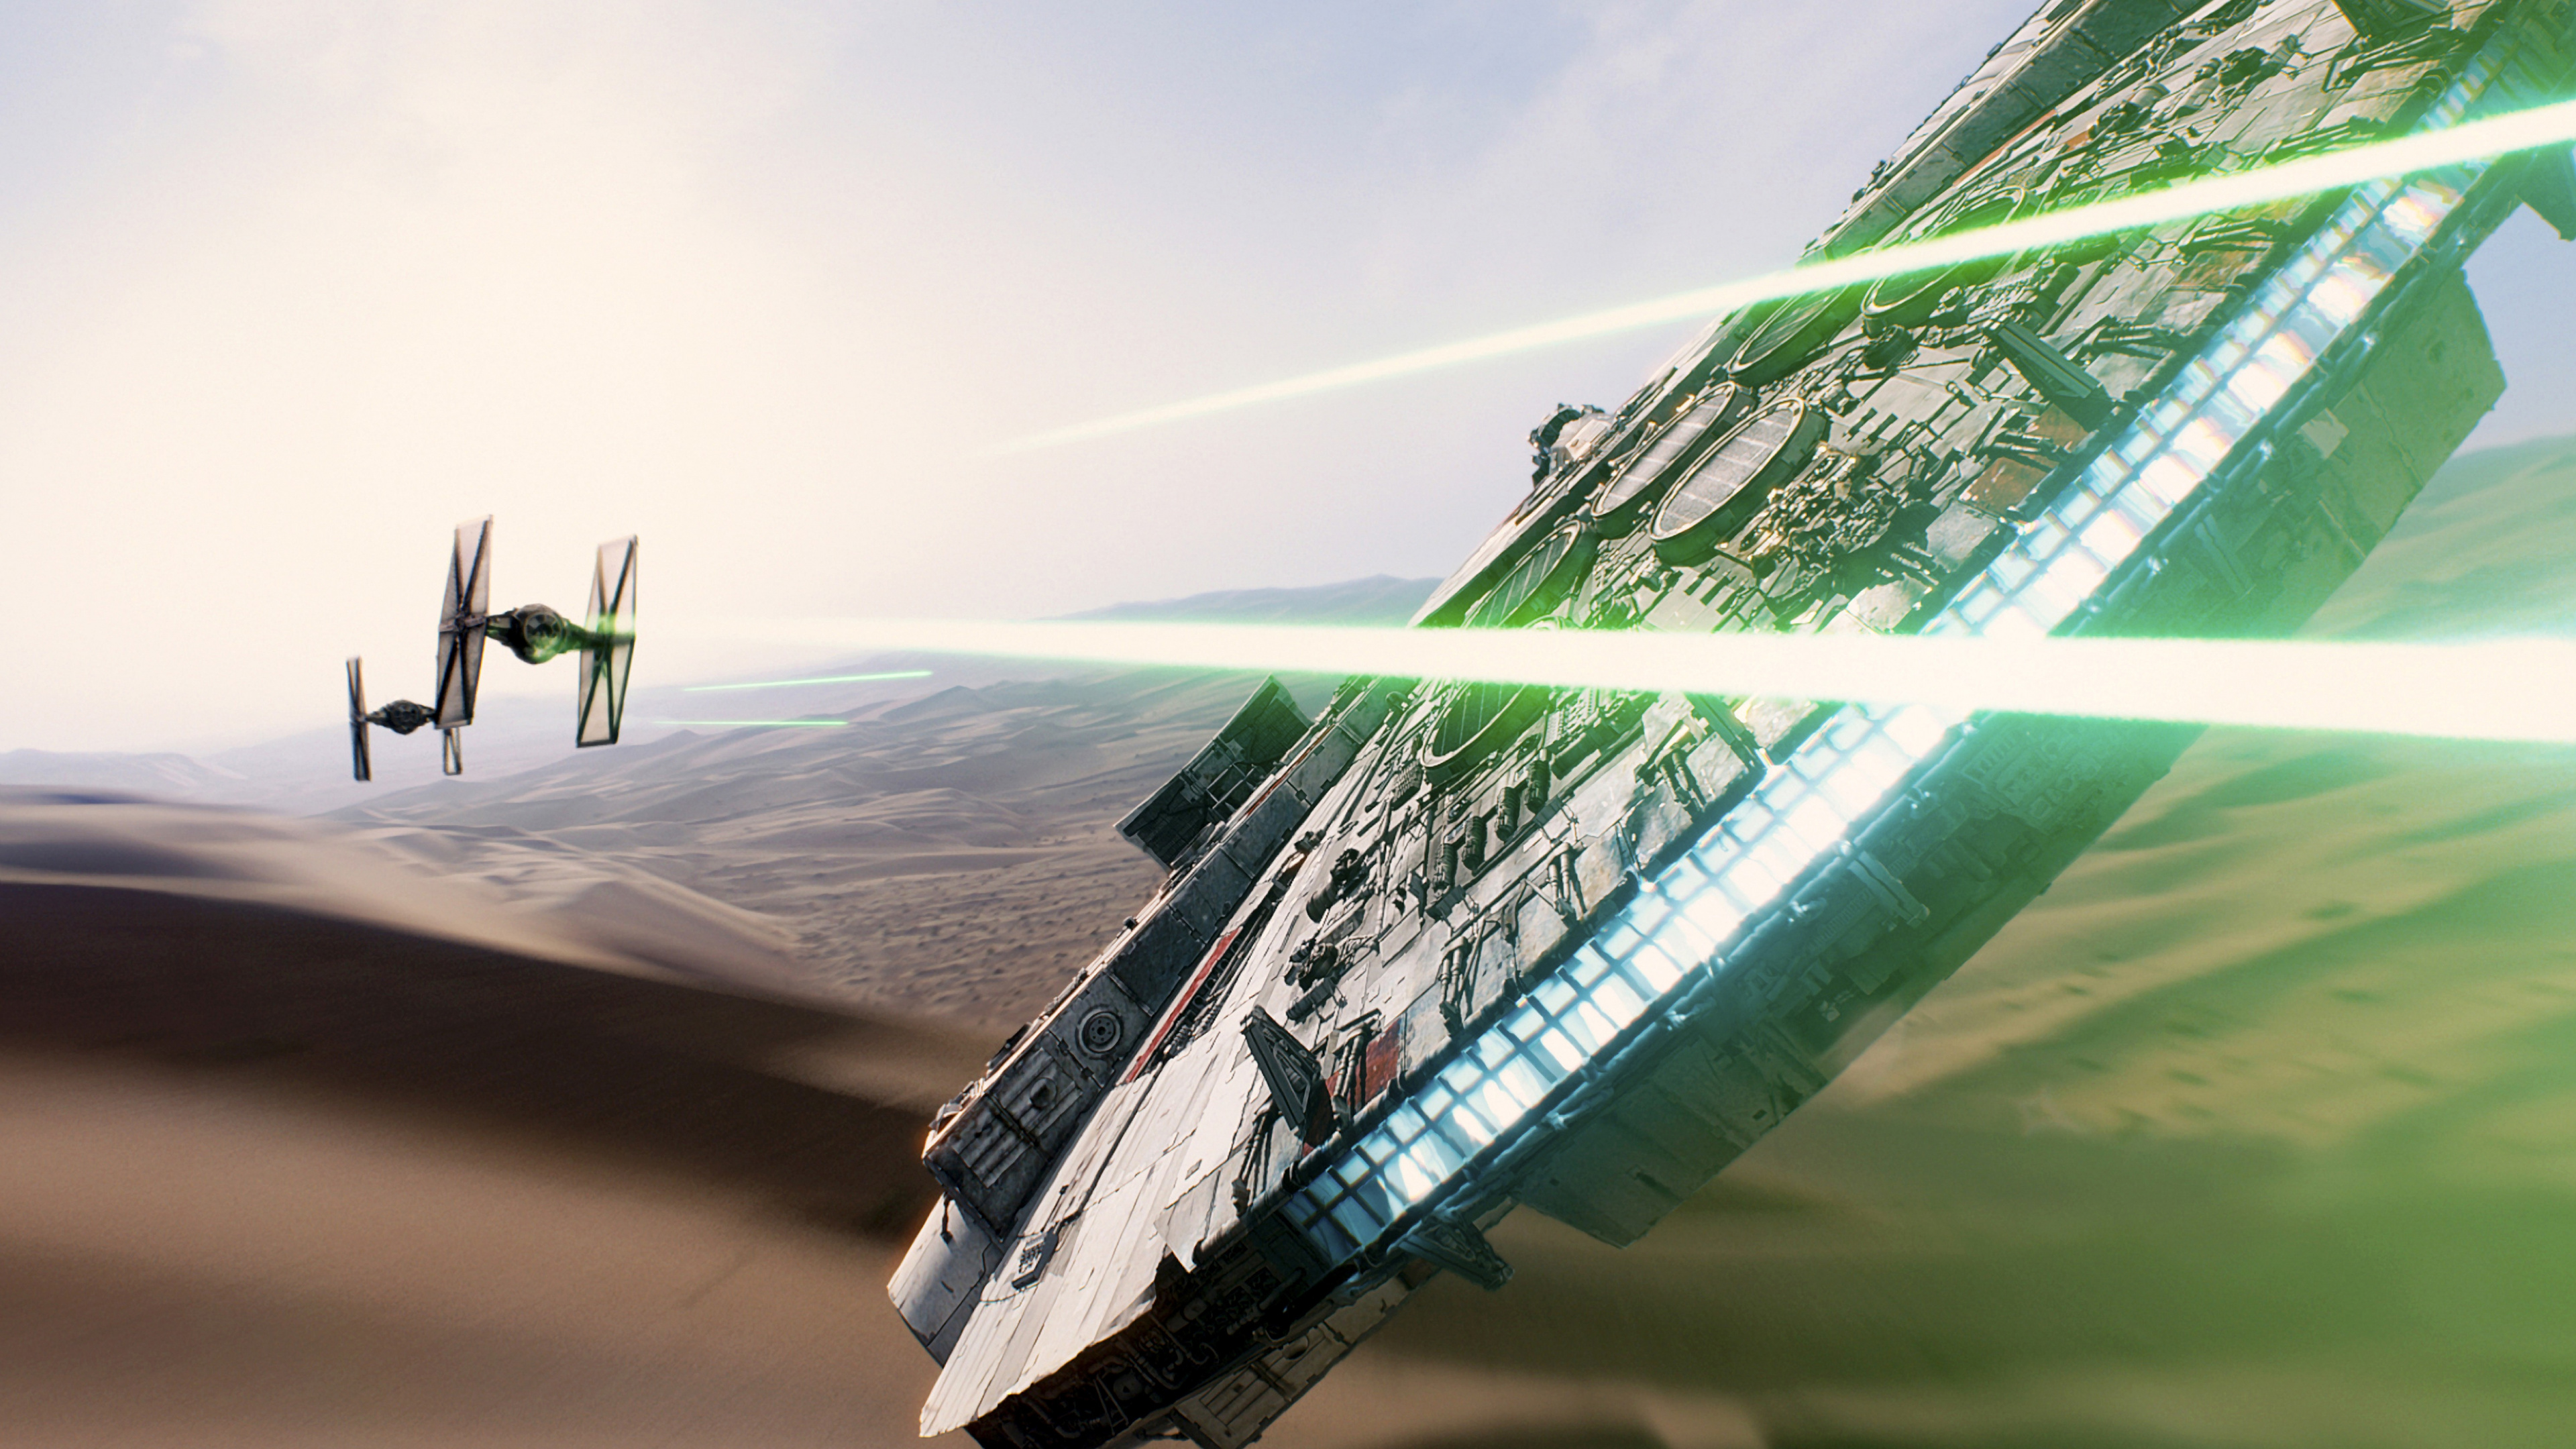 Millennium Falcon, Star Wars, Wing, The Force, Air Travel. Wallpaper in 3840x2160 Resolution